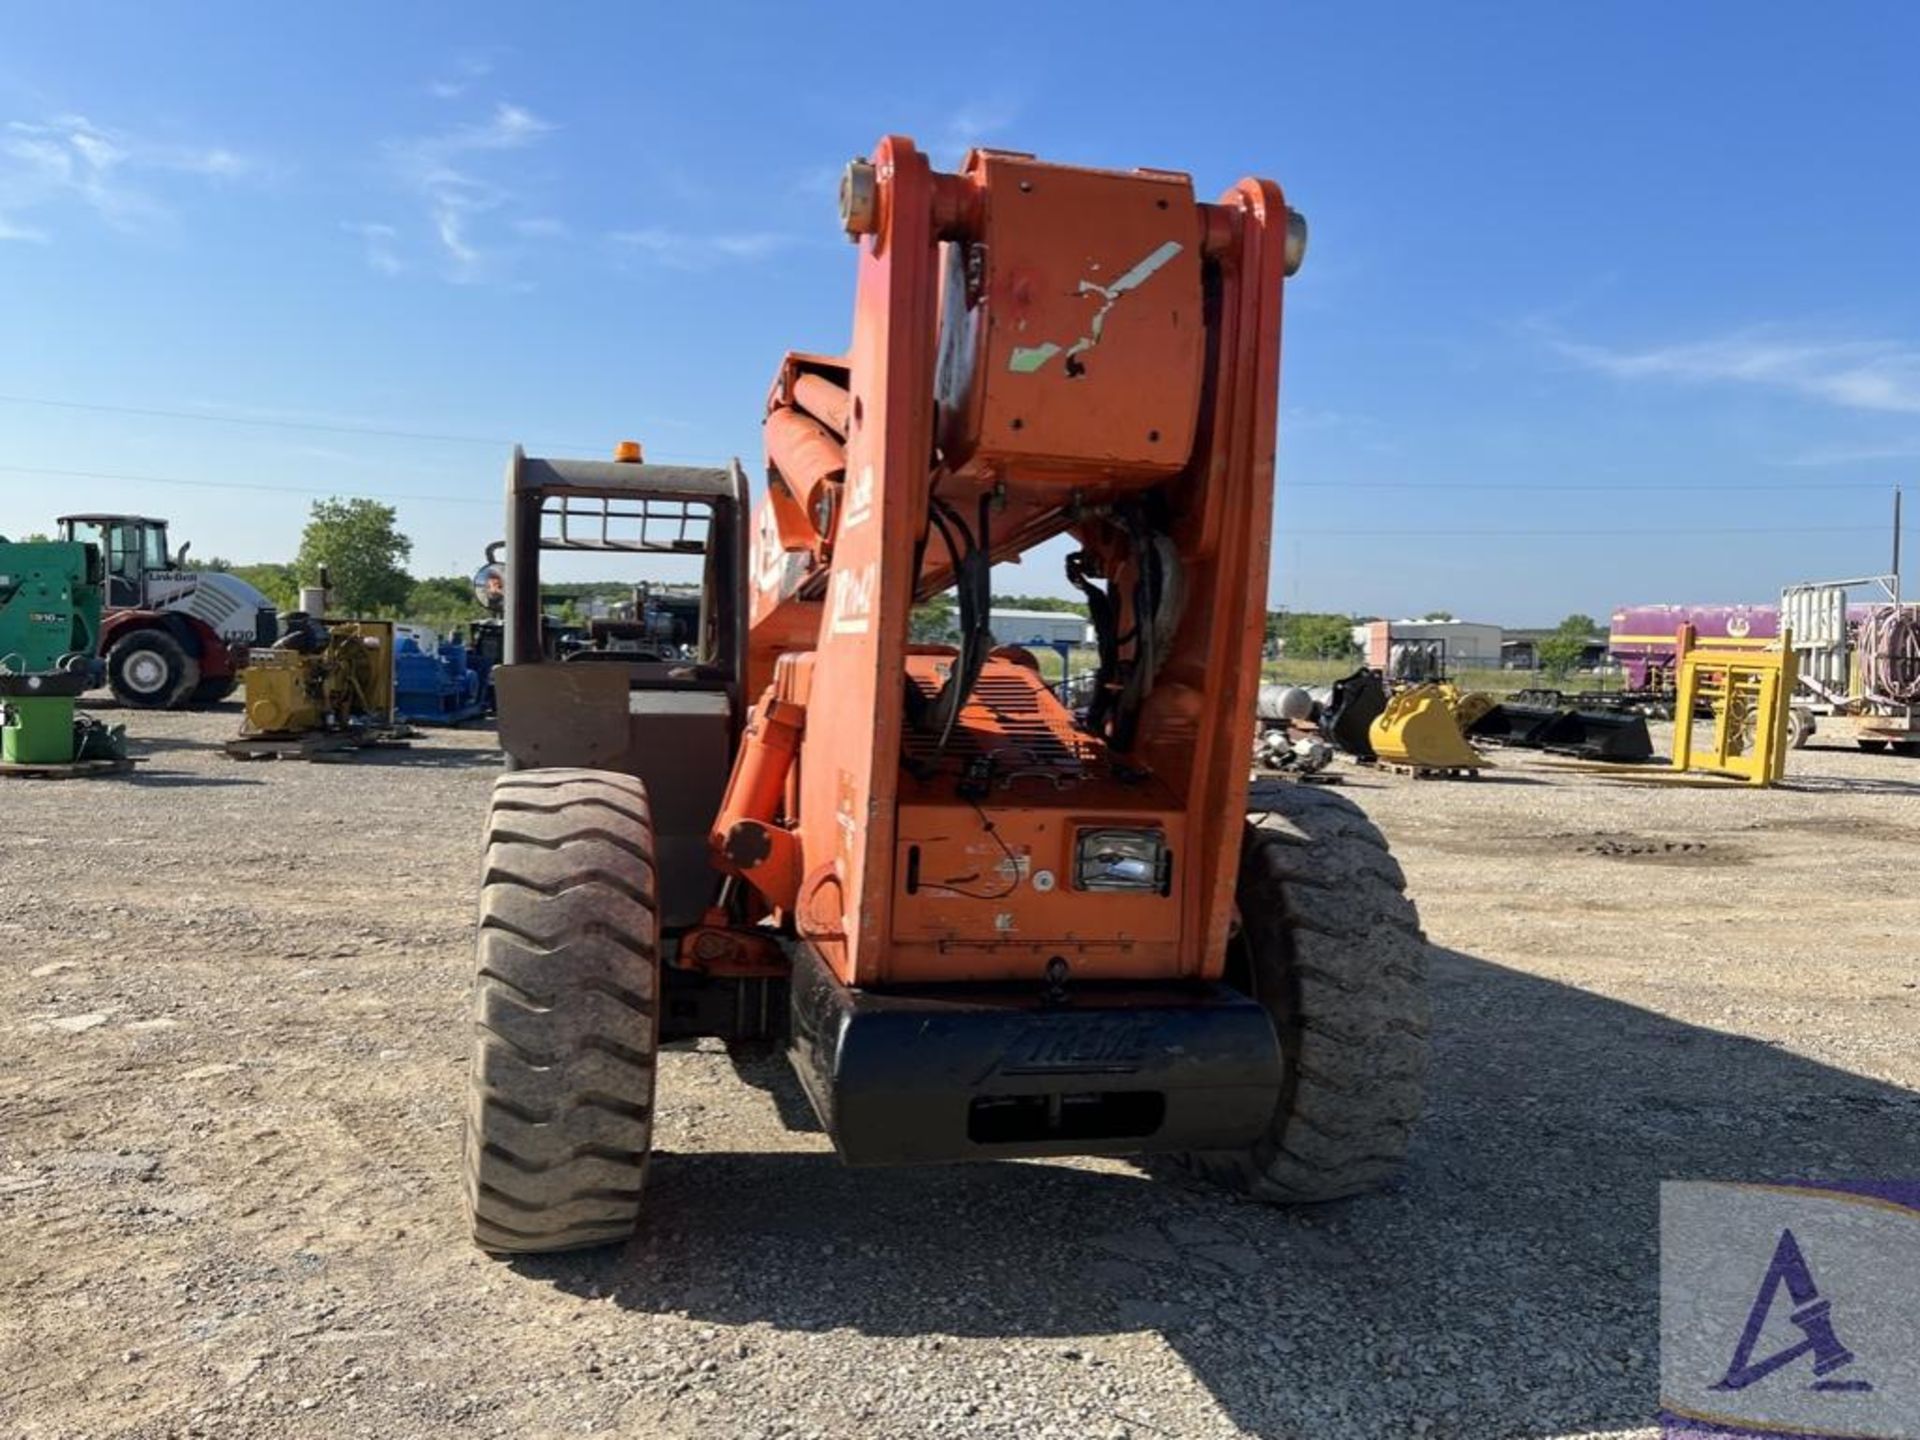 Extreme XR 1642 Telehandler, 16,000# Capacity, 42' Lift Height, OROPS - Image 19 of 50